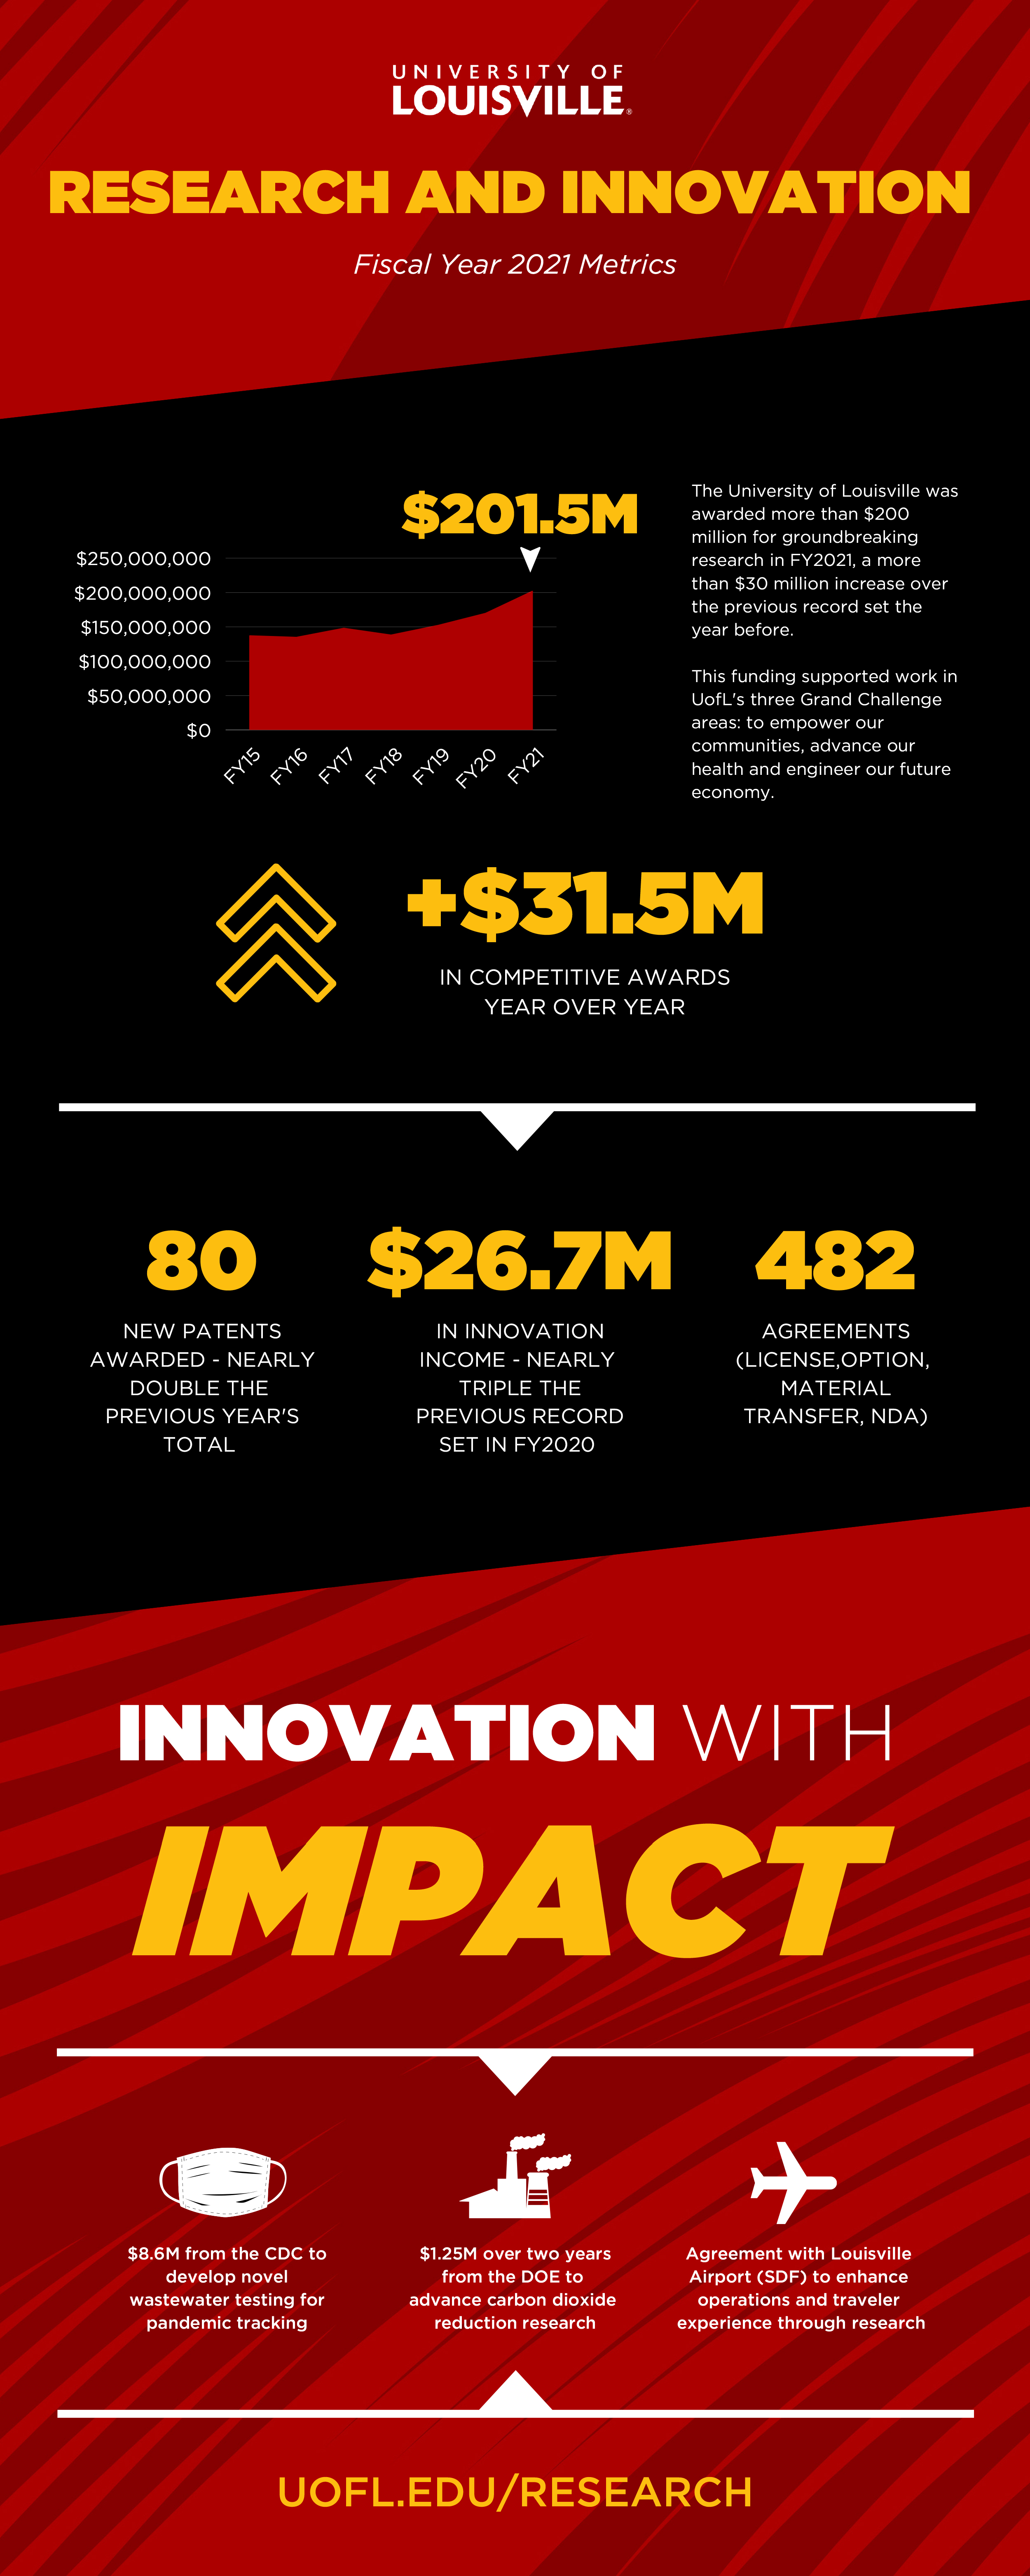 A snapshot of UofL's record-breaking research and innovation year.